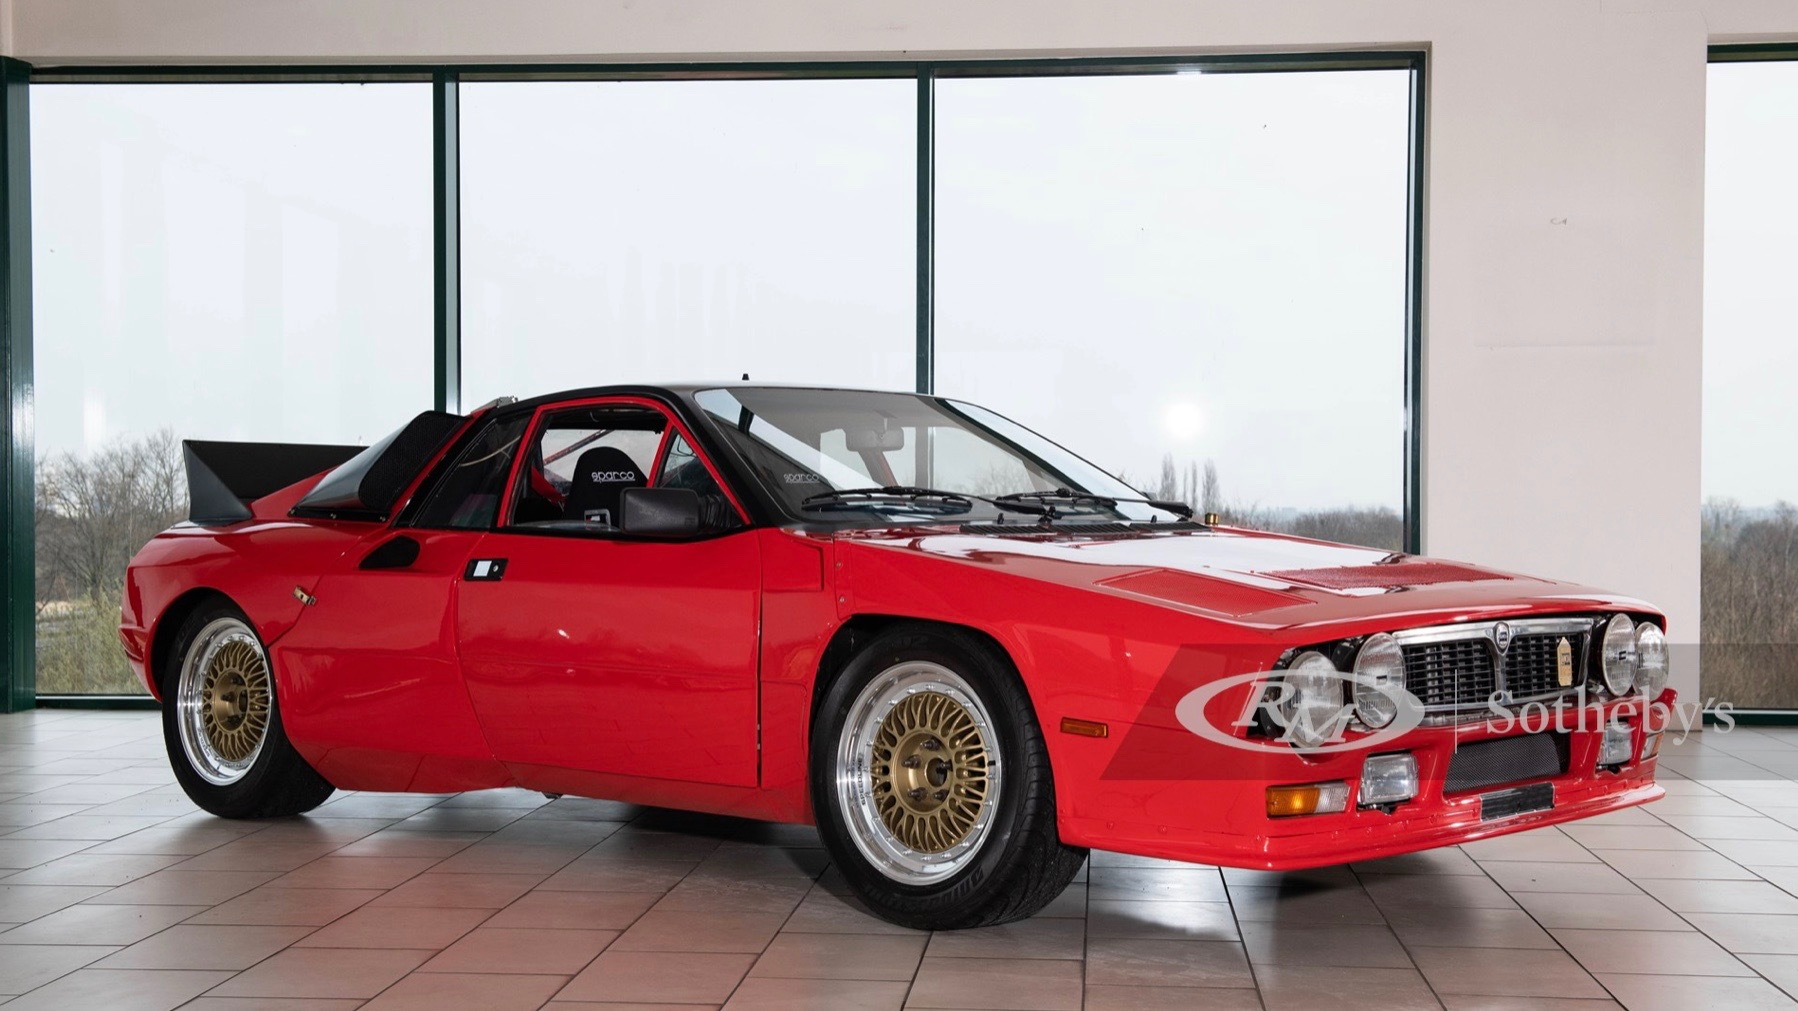 1980 Lancia Rally SE 037 prototype (Photo by RM Sotheby's)